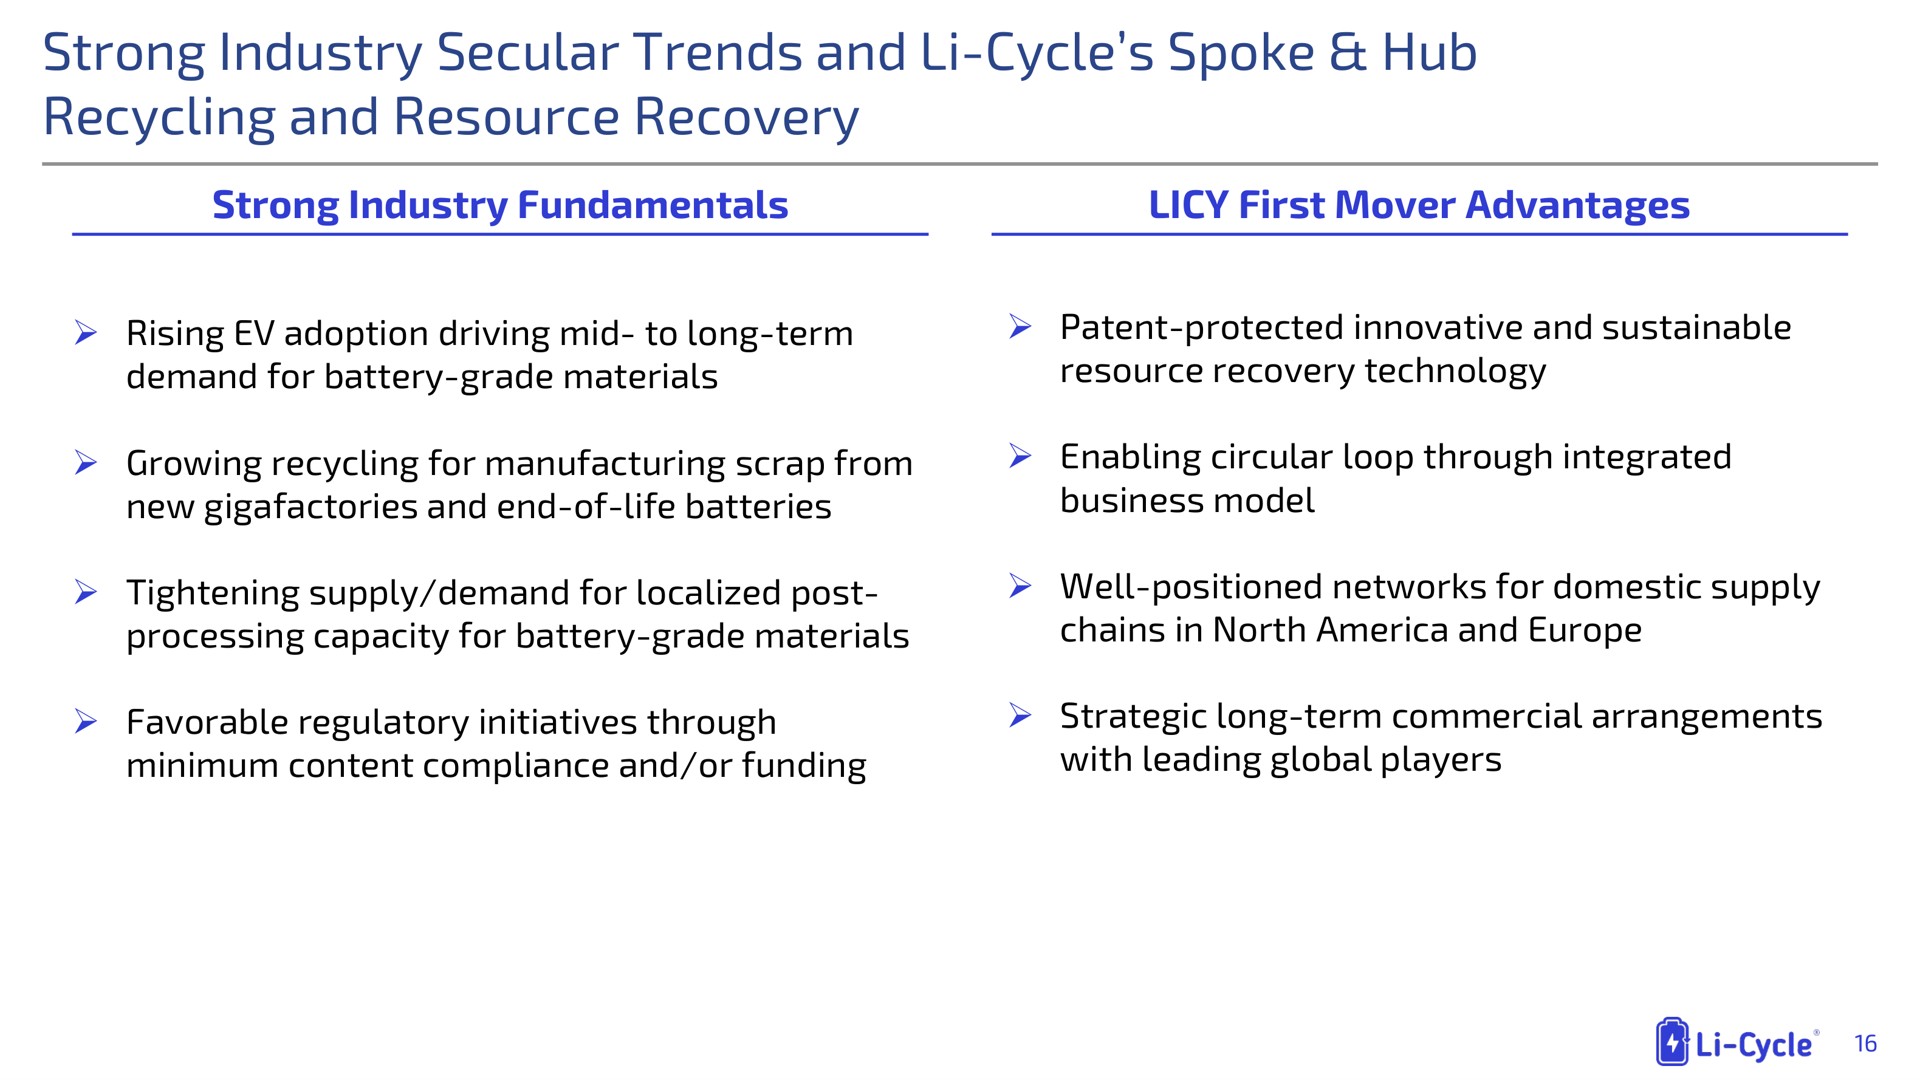 strong industry secular trends and cycle spoke hub recycling and resource recovery | Li-Cycle